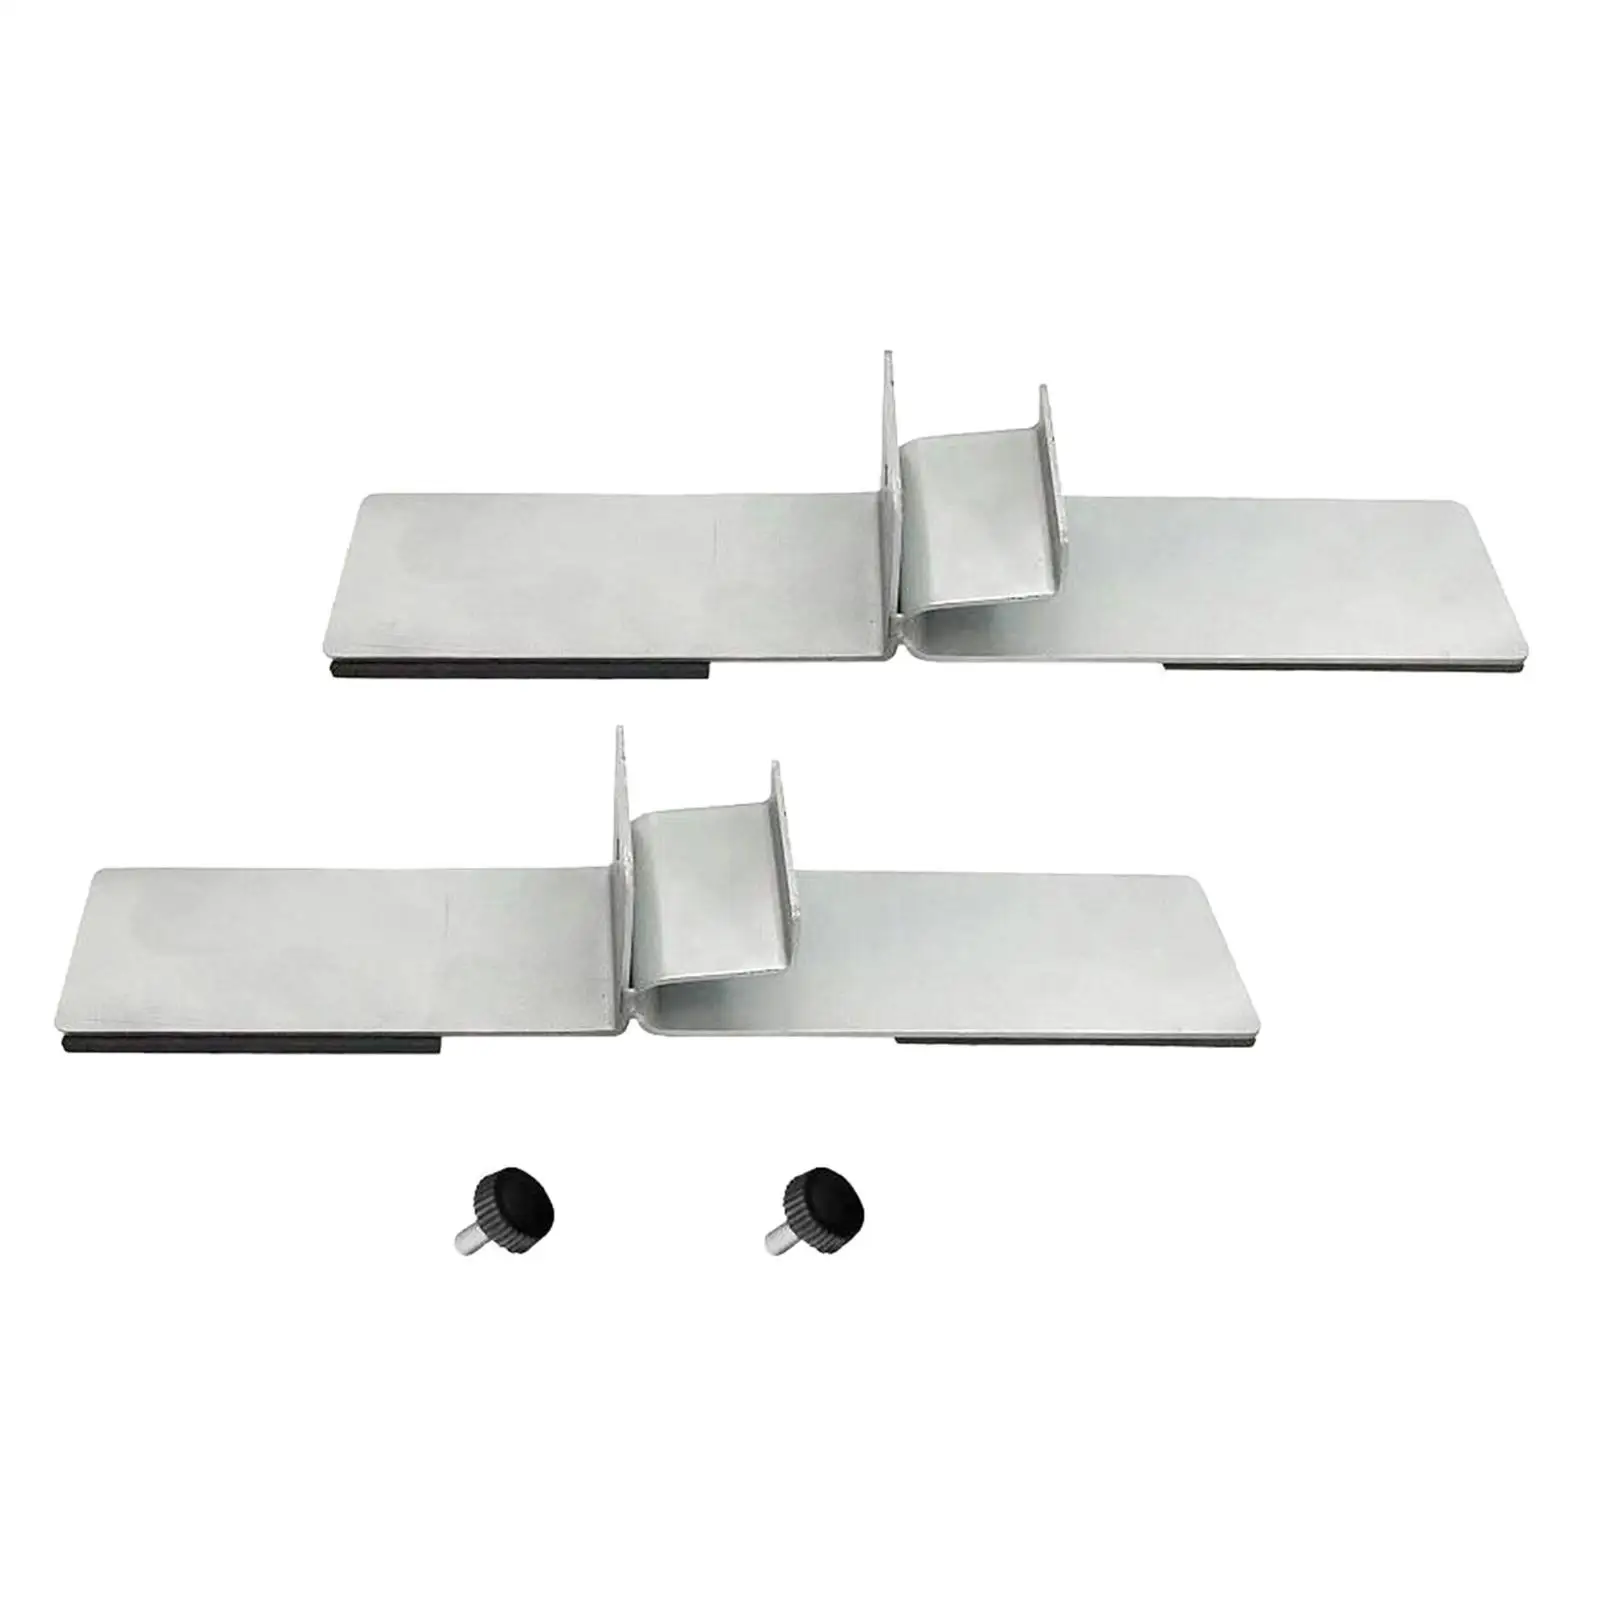 Infrared Heating Panel Stand Feet Household Accessory Universal Bracket Easy Install Feet Suitable Durable 2 Pieces for home